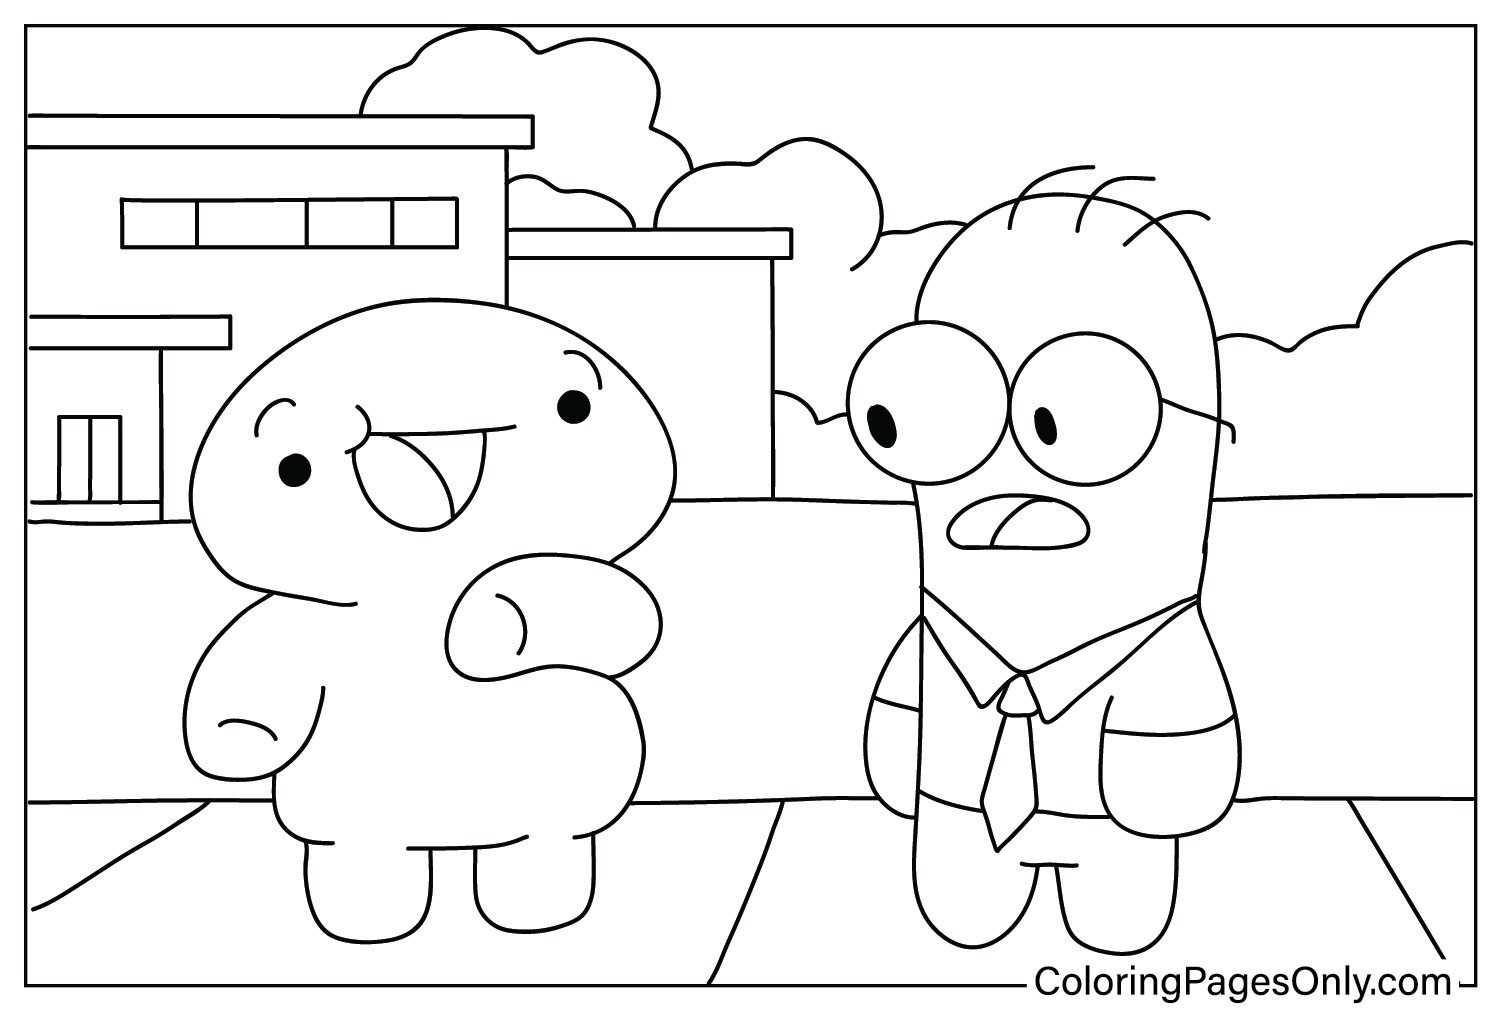 Cartoon TheOdd1sOut Coloring Page from TheOdd1sOut